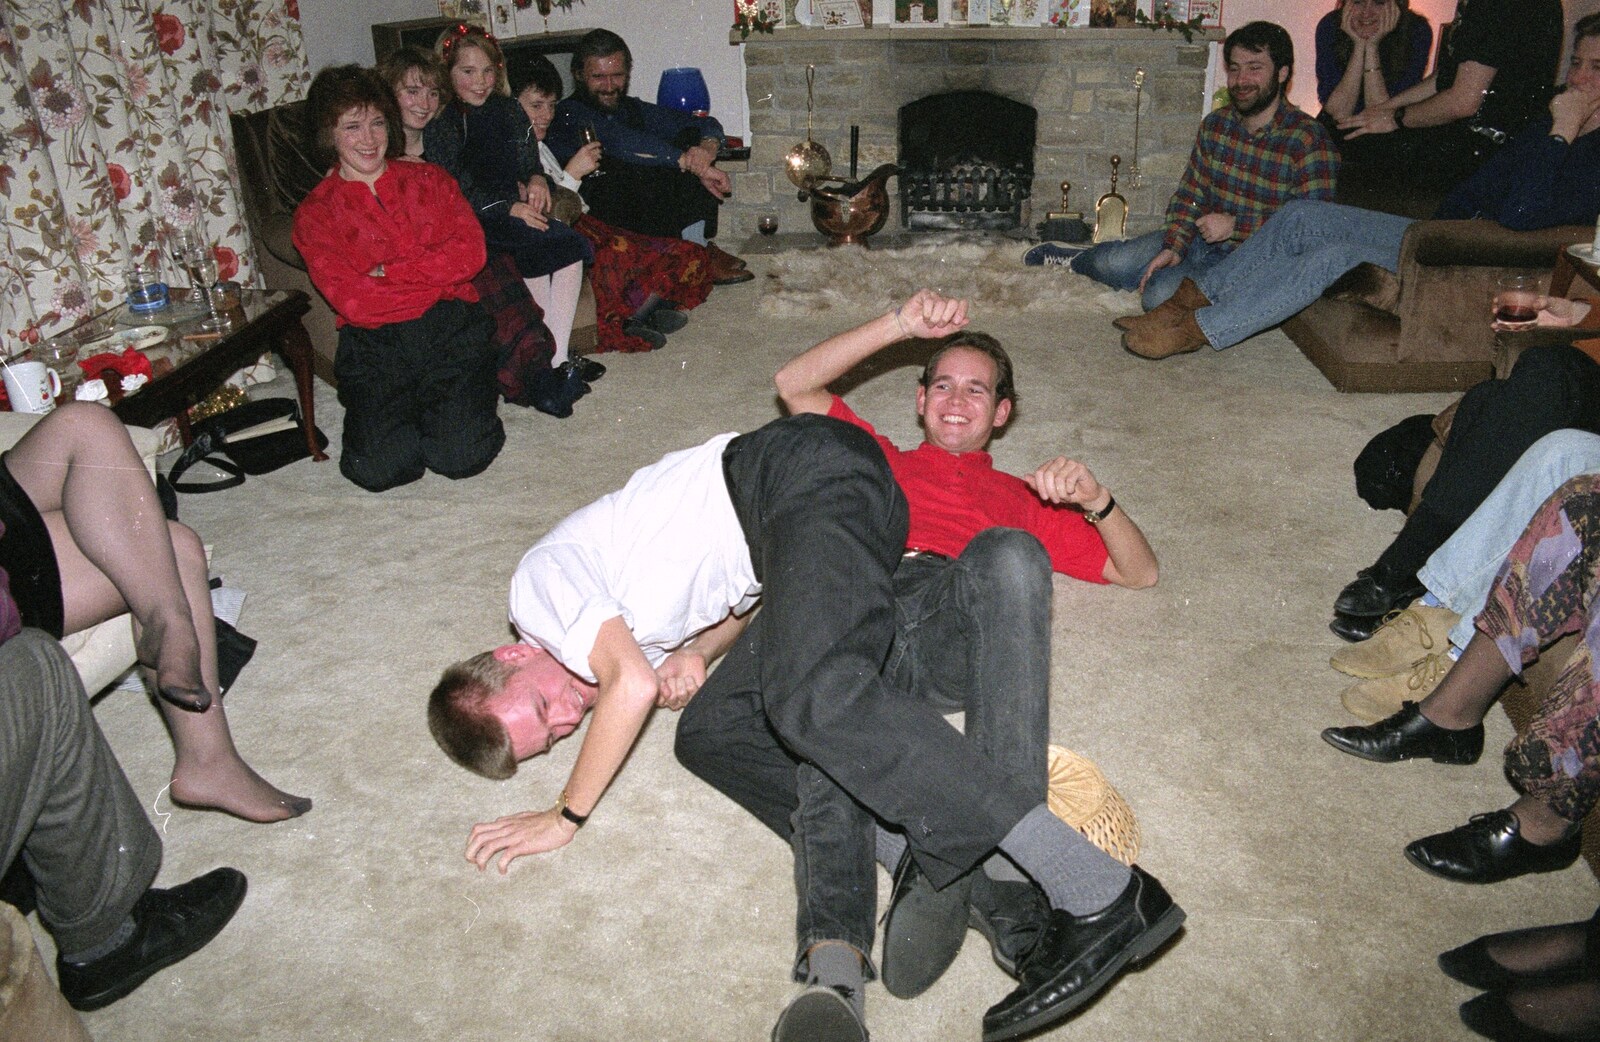 The leg wrestling is over for Nosher from New Year's Eve at Phil's, Hordle, Hampshire - 31st December 1990